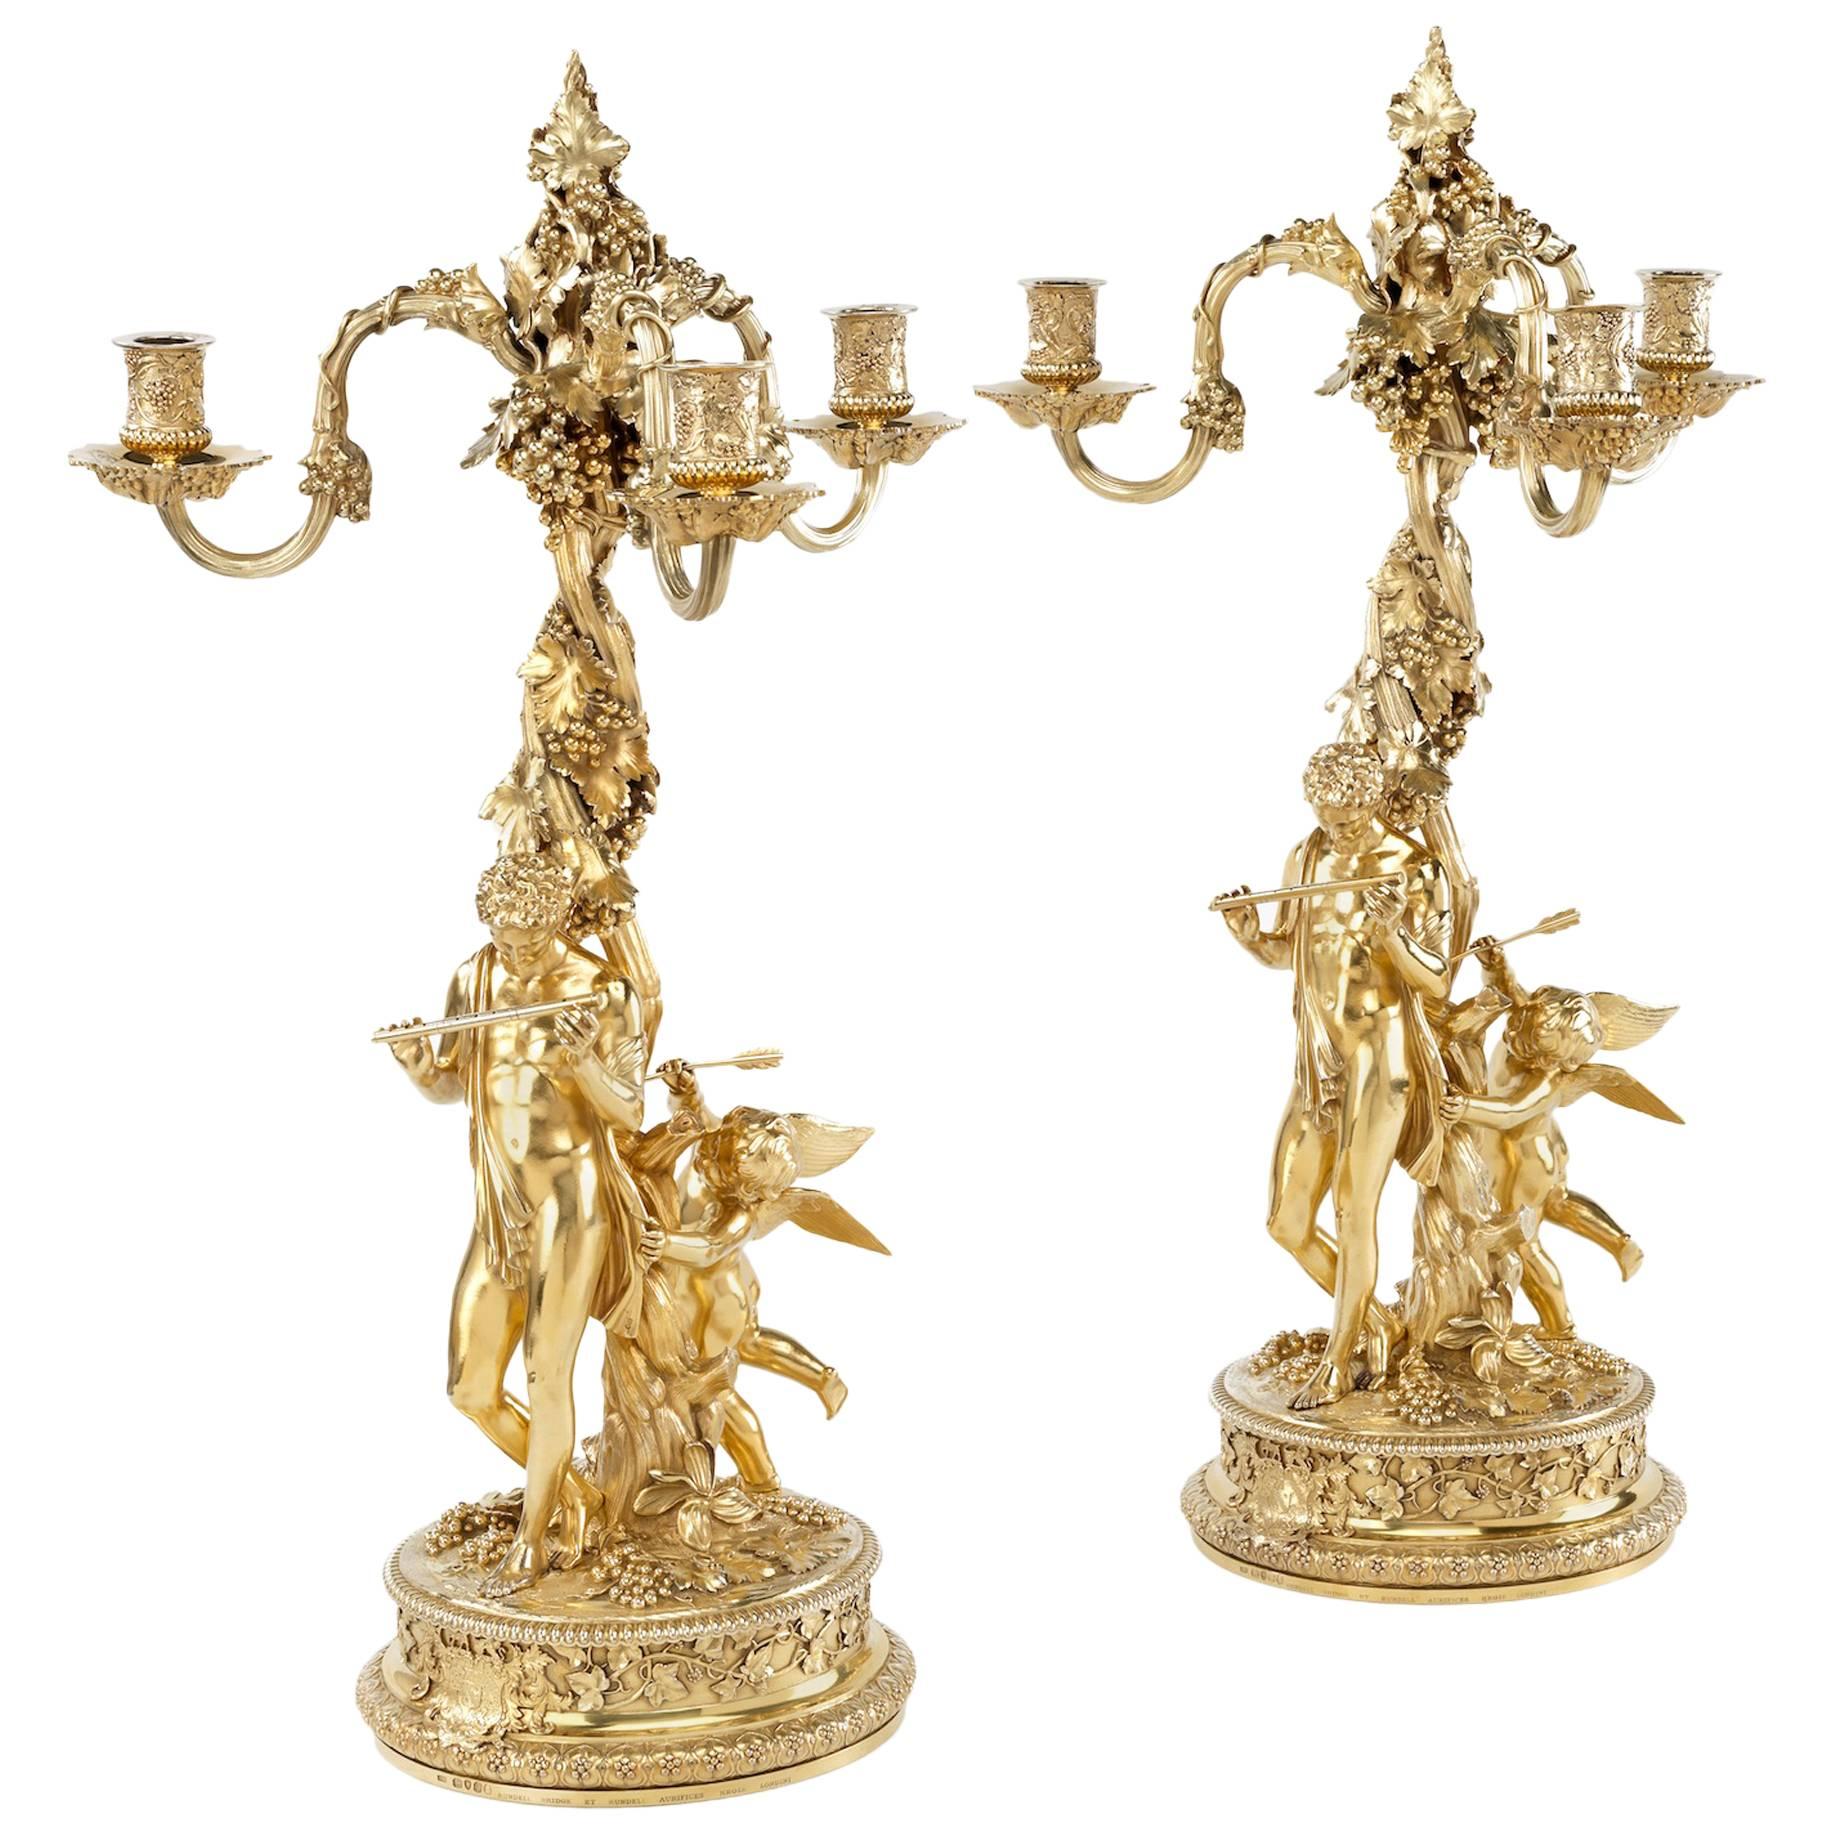 Outstanding Pair of Sterling Silver-Gilt Three-Light Candelabra For Sale